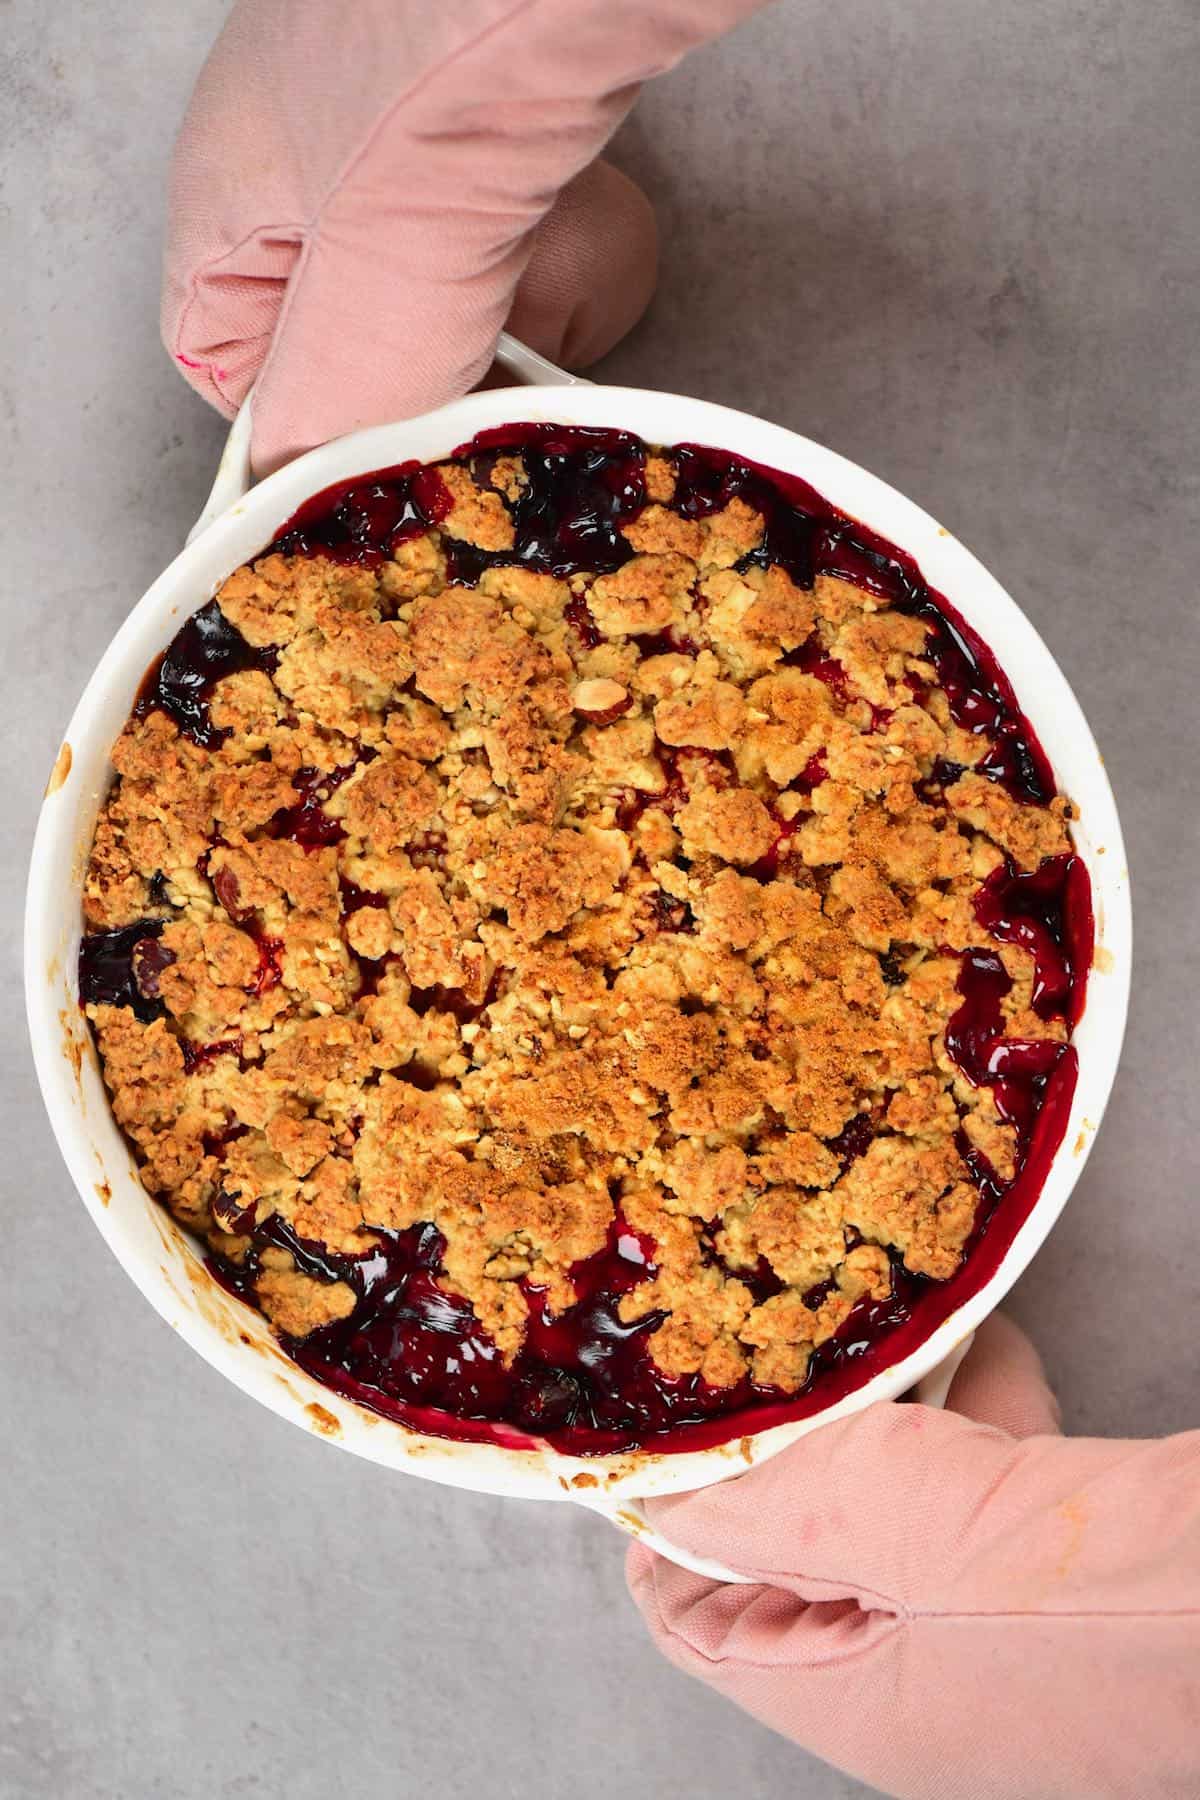 Gloved hands holding a baking dish with berry crumble